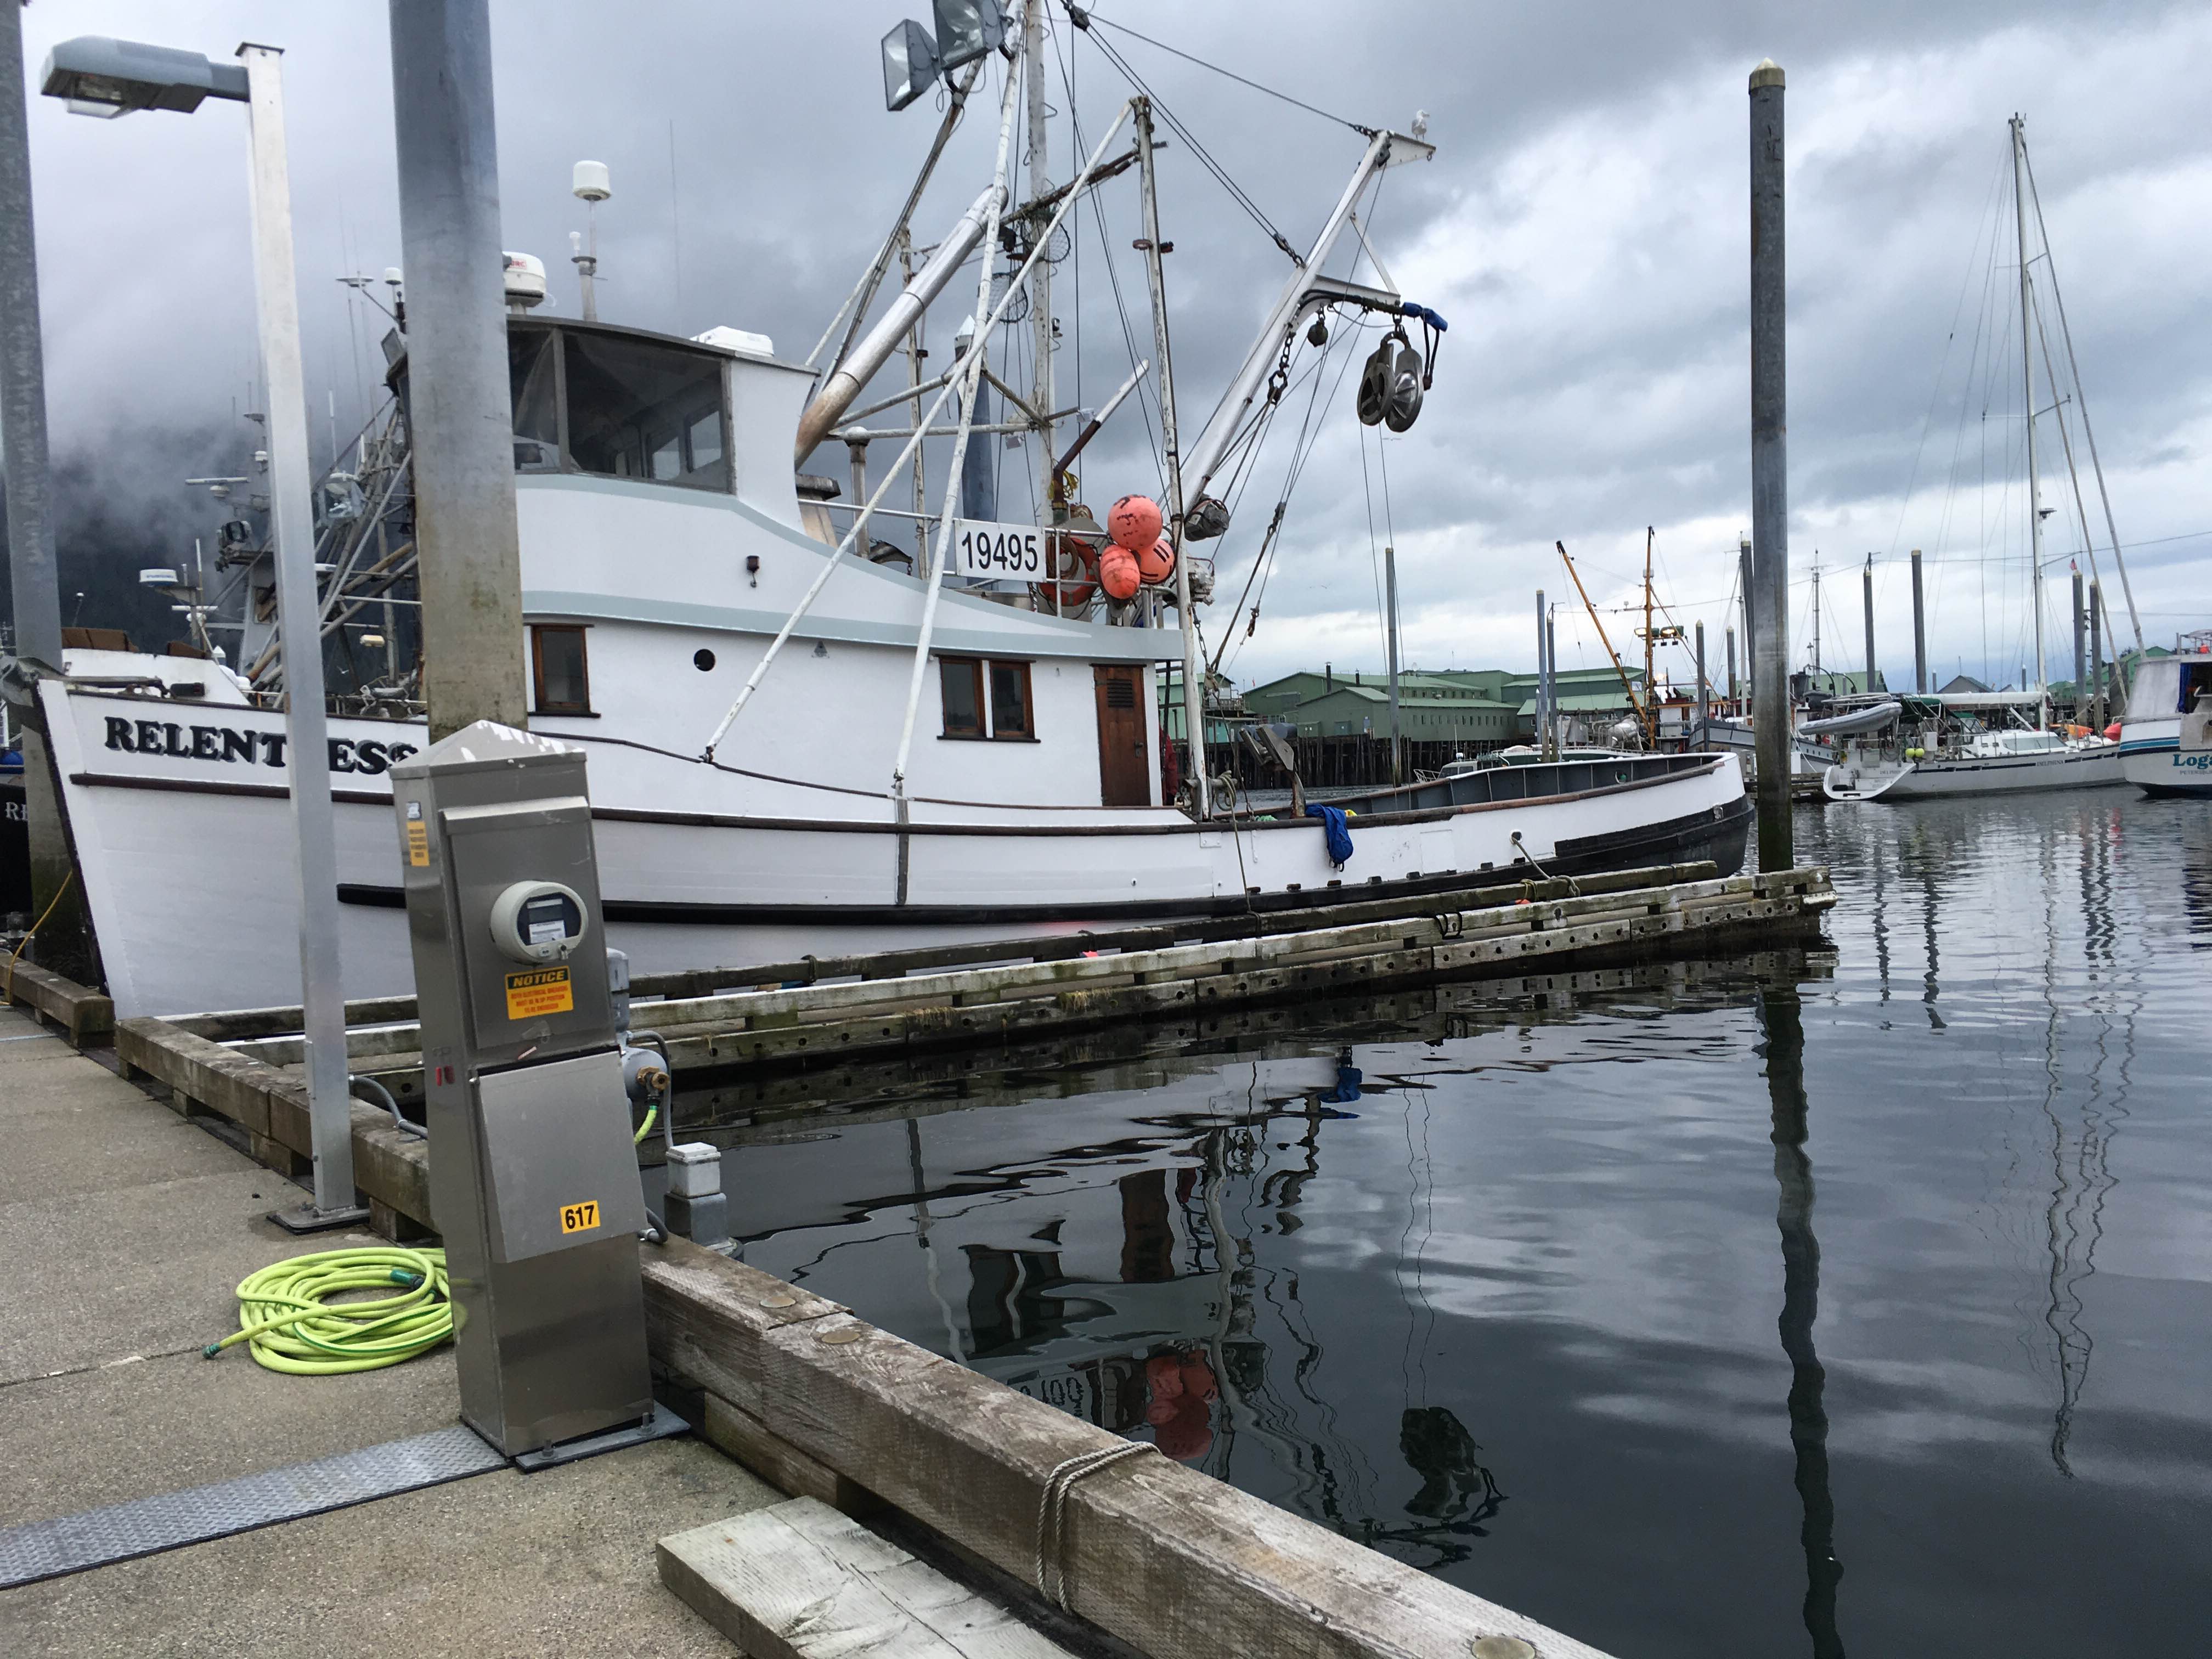 The F/V Relentless docked in Petersburg’s South Harbor and the crew removed their net. (Photo by Abbey Collins, KFSK - Petersburg)